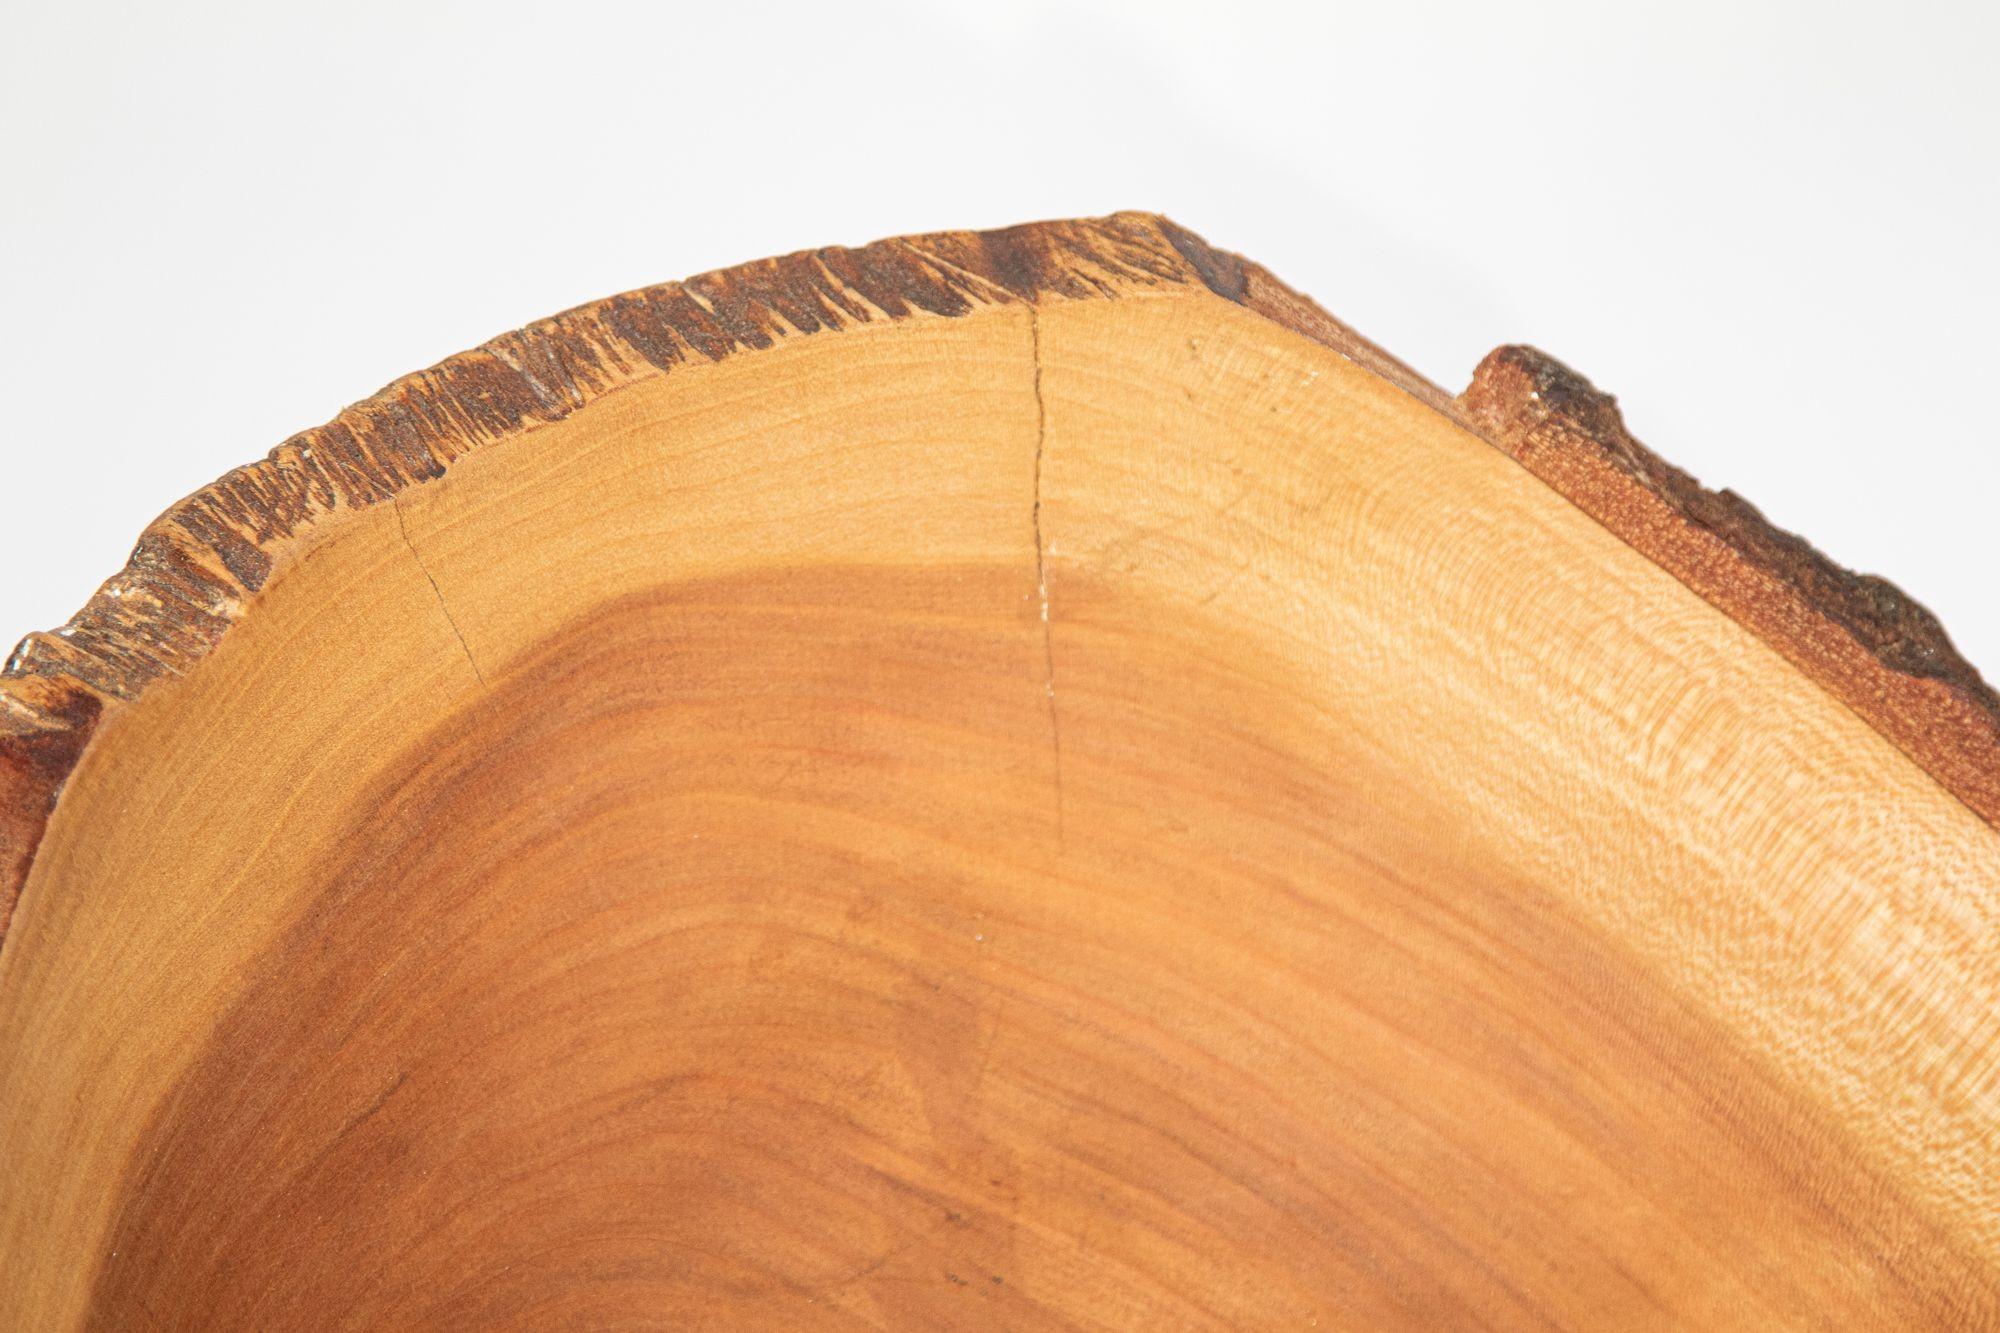 Vintage Spencer Peterman Live Edge Cherry Oval Bowl In Good Condition For Sale In North Hollywood, CA